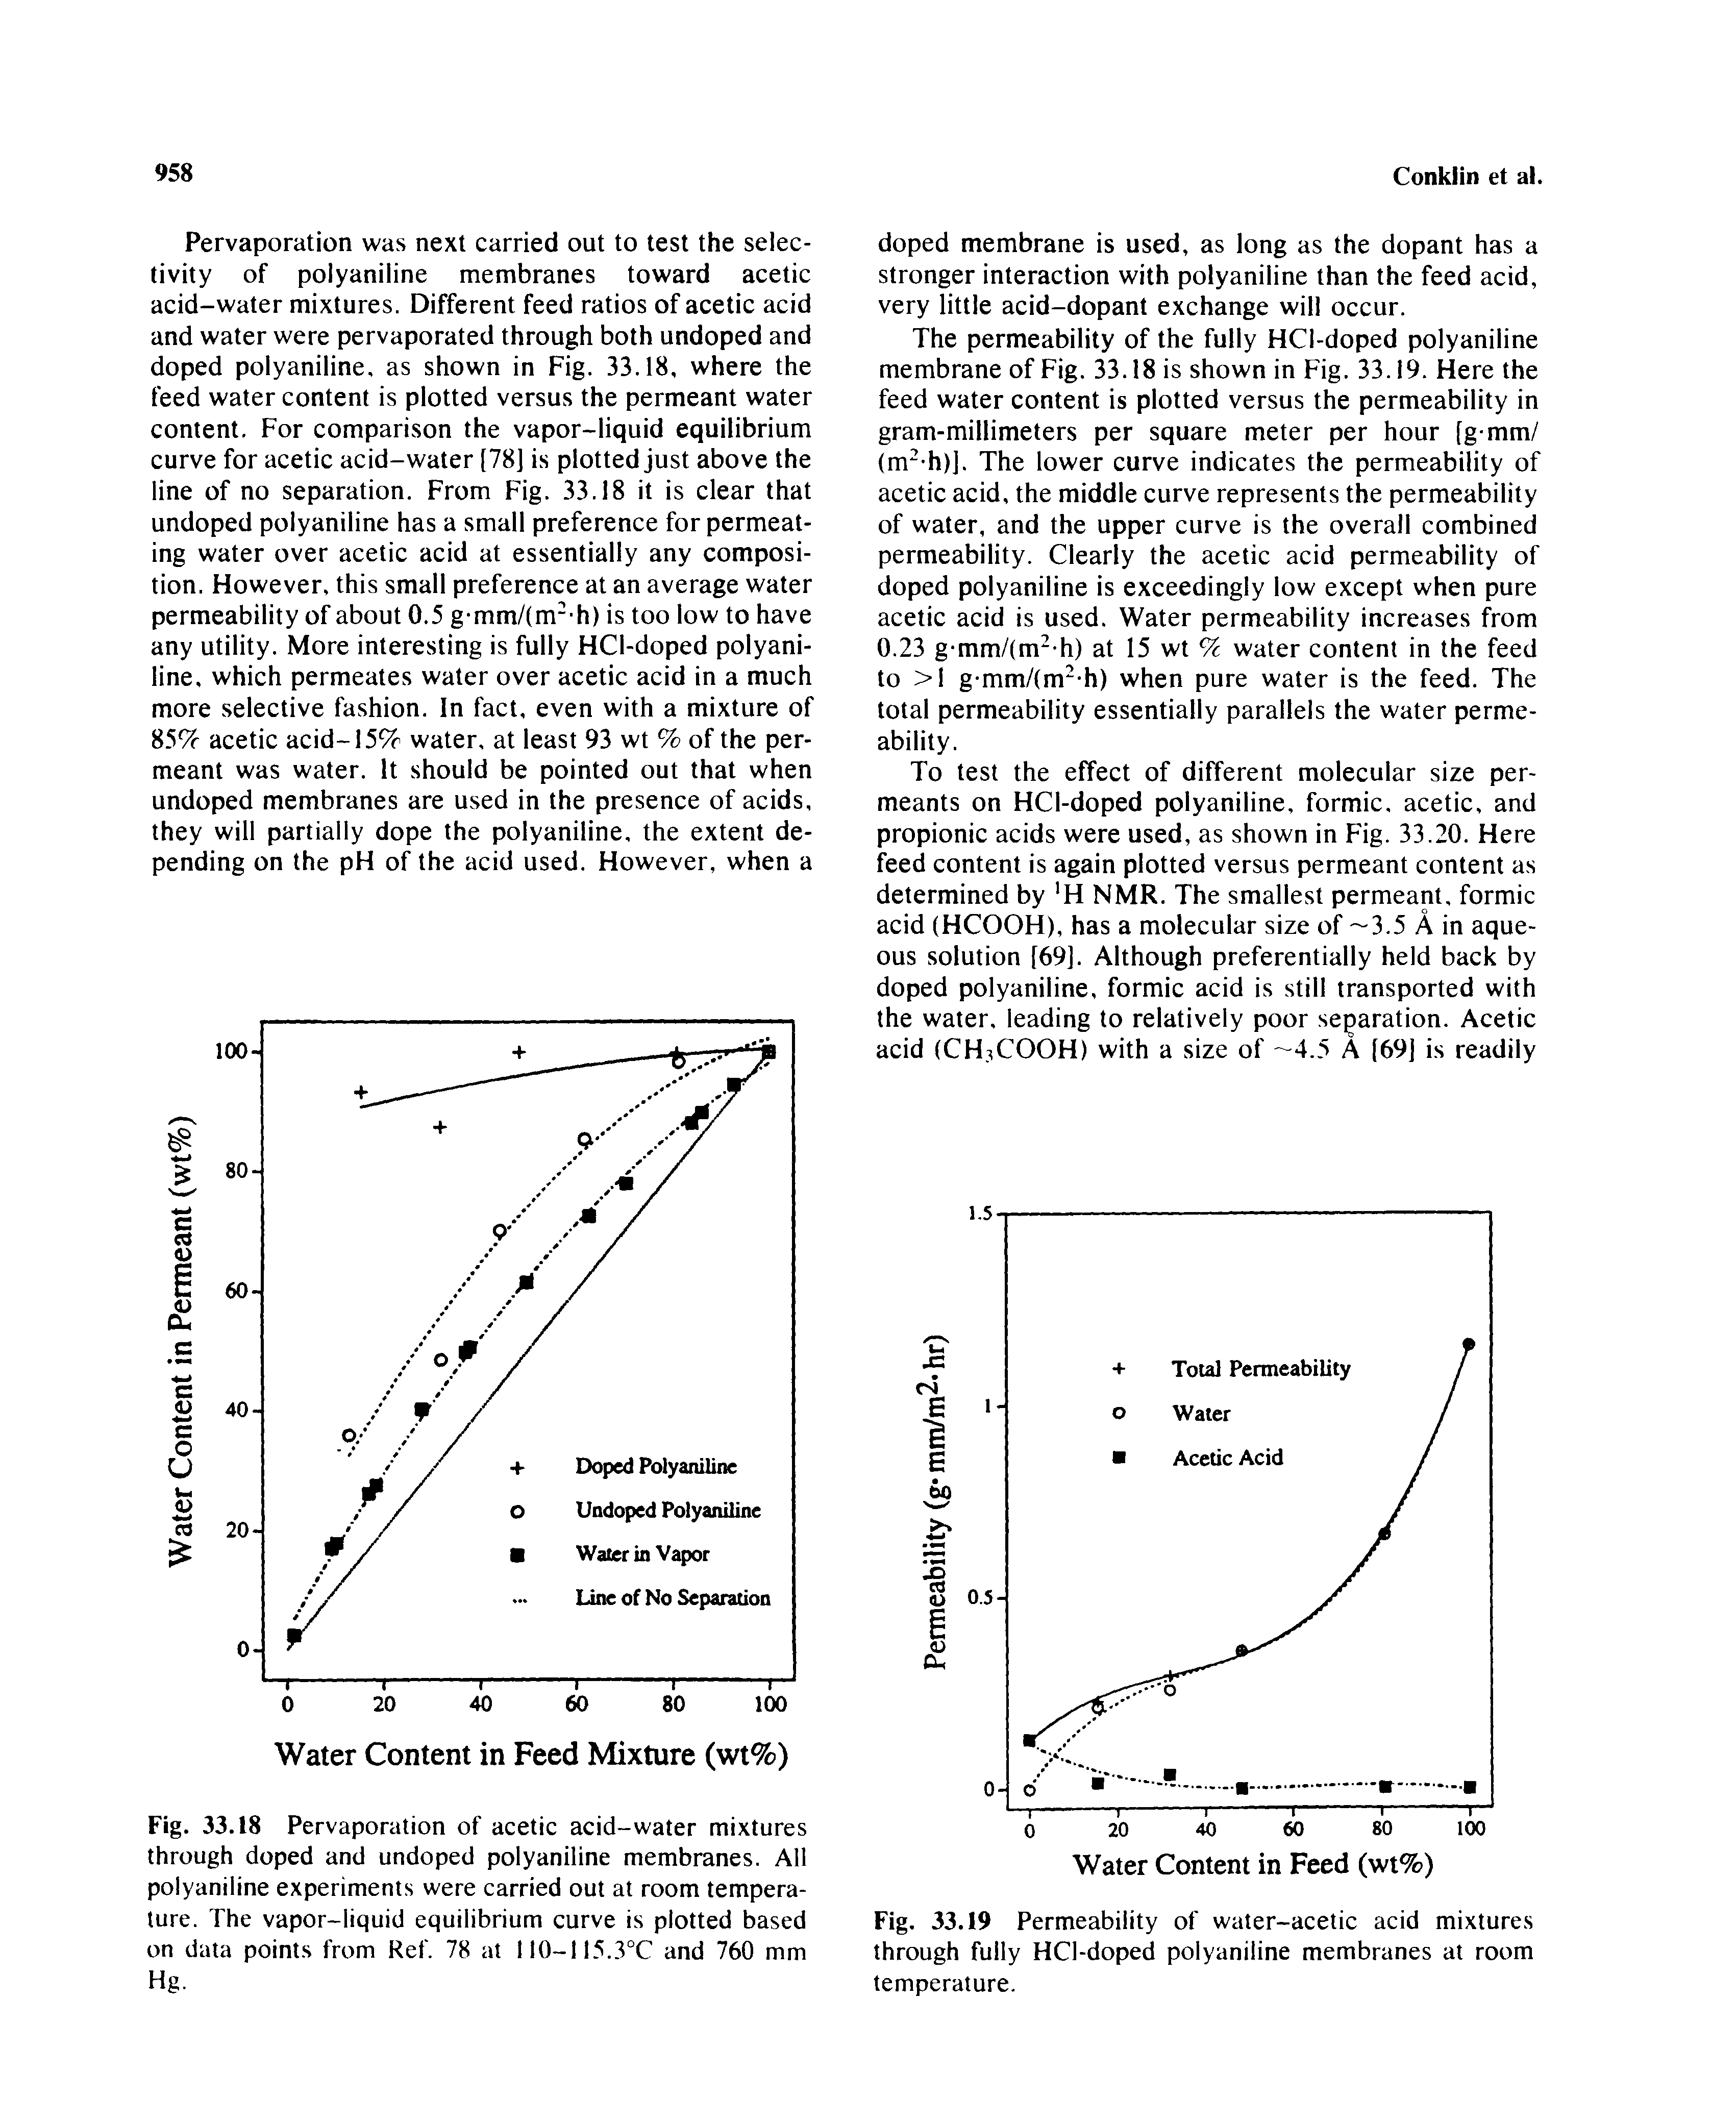 Fig. 33.18 Pervaporation of acetic acid-water mixtures through doped and undoped polyaniline membranes. All polyaniline experiments were carried out at room temperature. The vapor-liquid equilibrium curve is plotted based on data points from Ref. 78 at 110-115.3°C and 760 mm Hg.